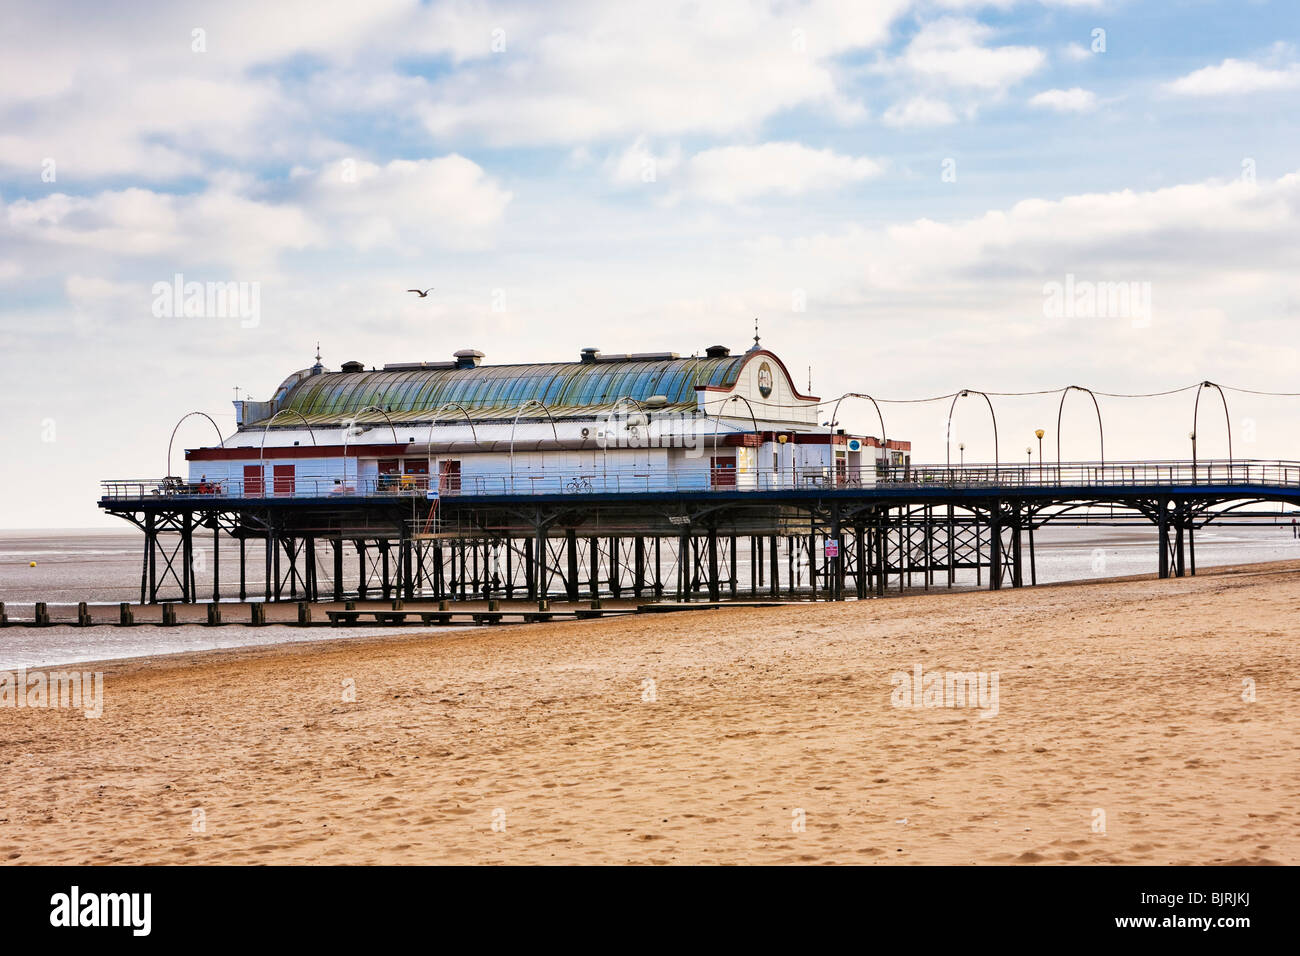 Pier at Cleethorpes Lincolnshire England UK Stock Photo